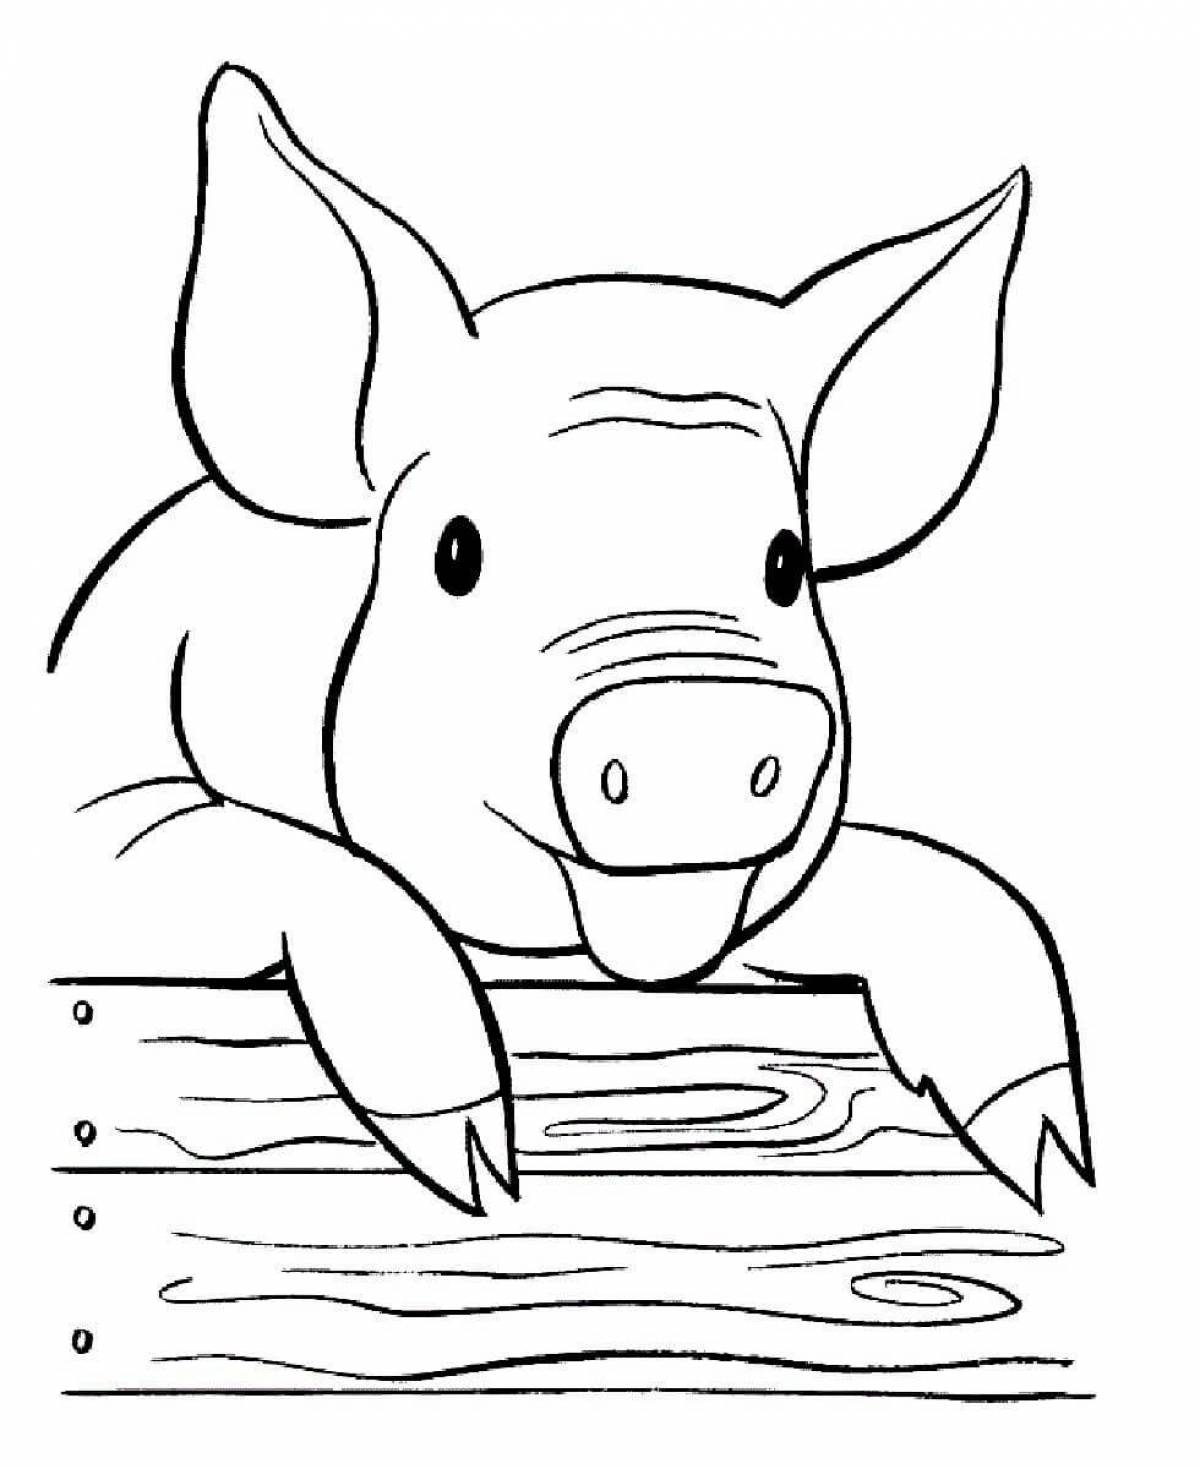 Peppy pig coloring page